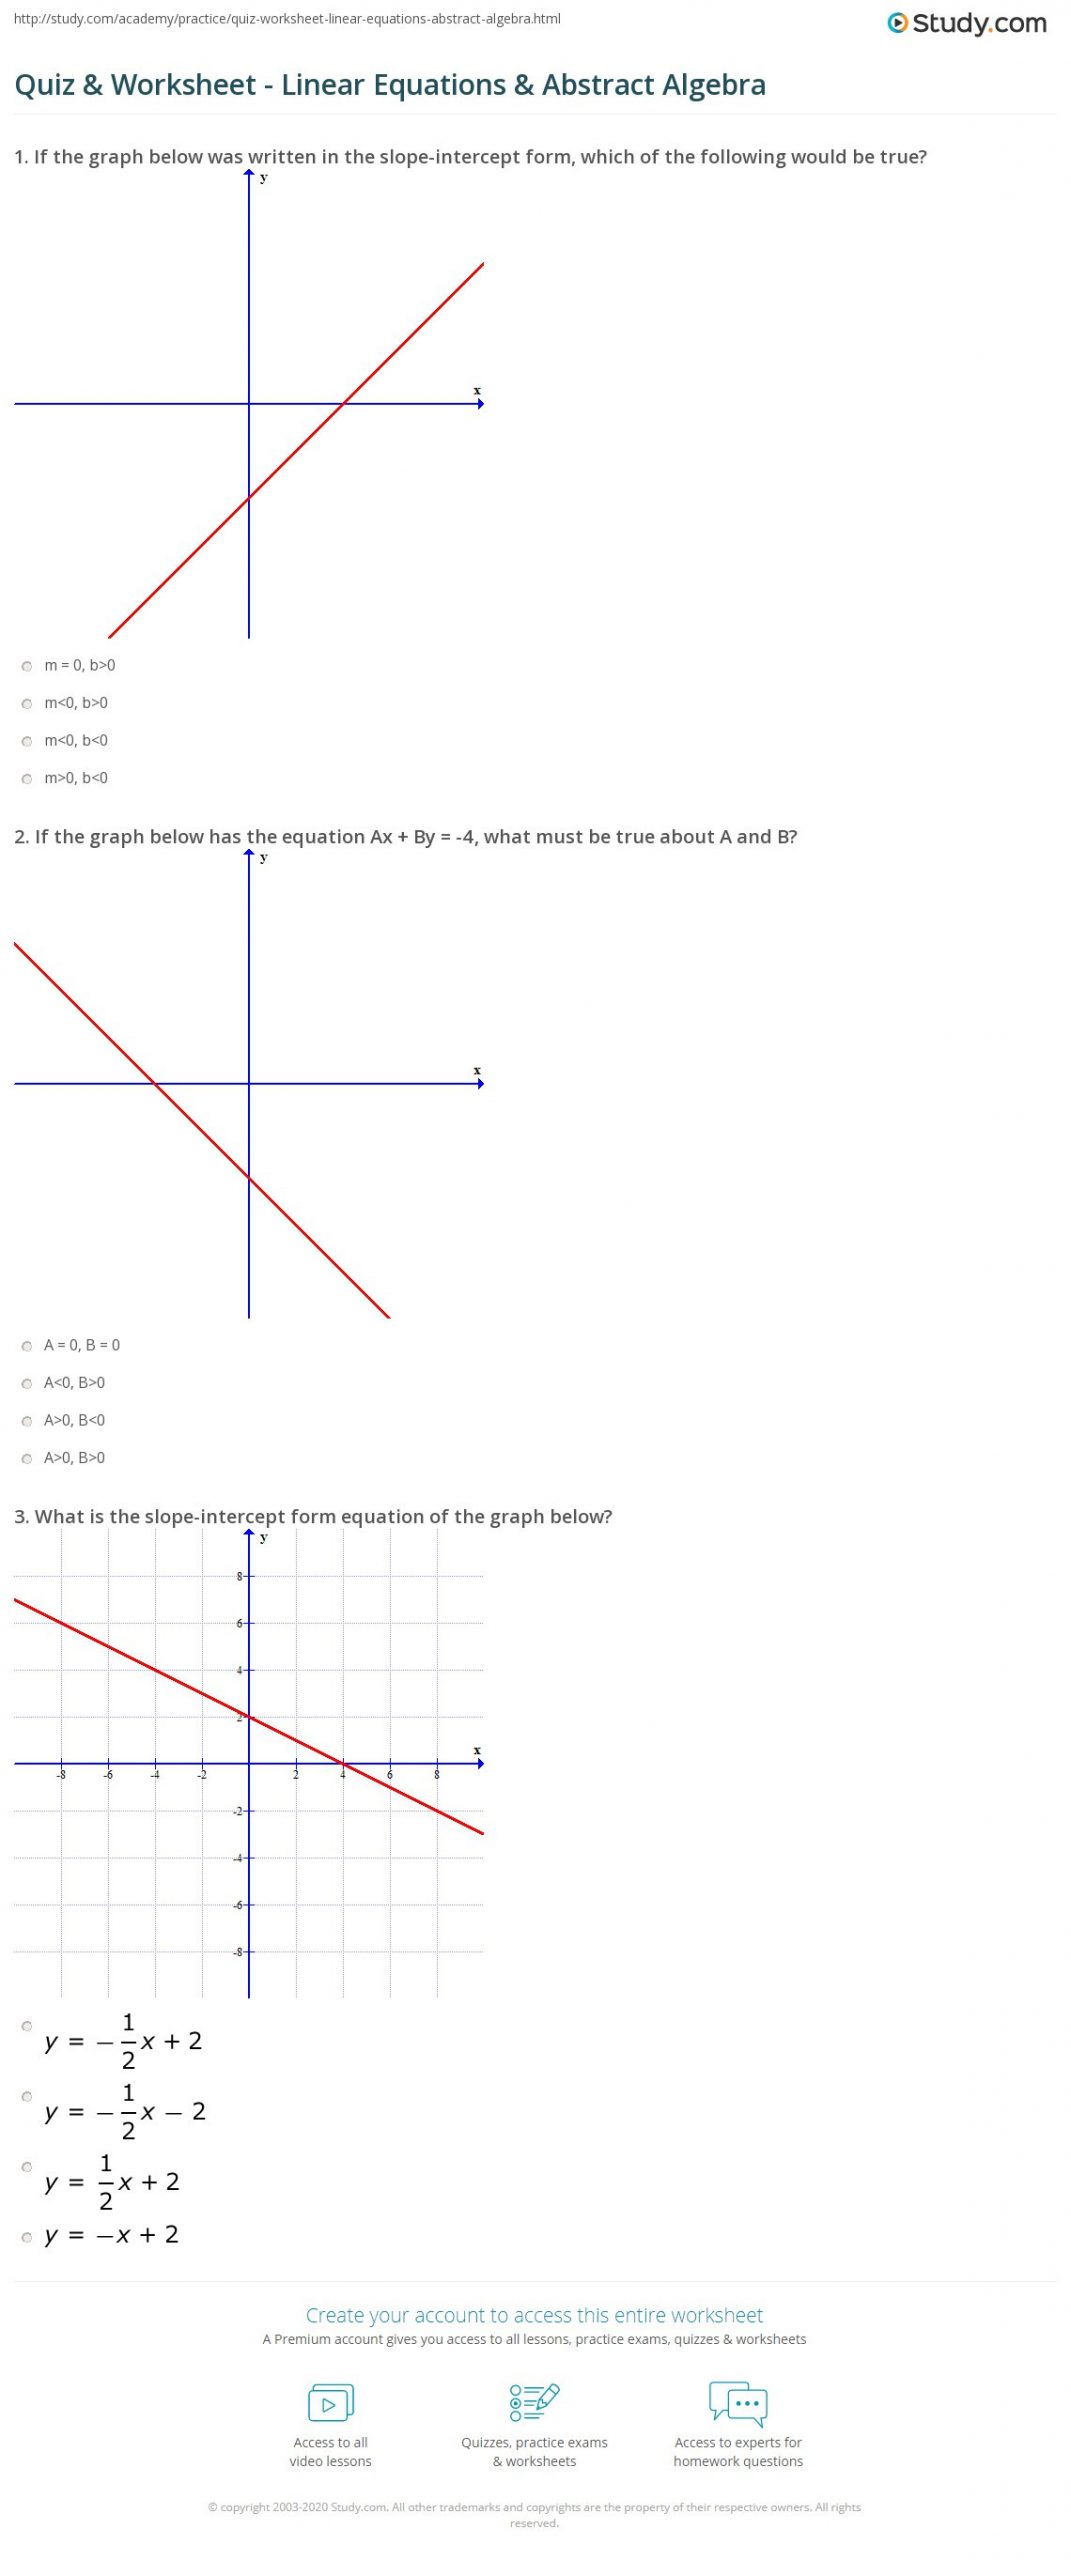 Graphing Linear Equations Practice Worksheet Quiz &amp; Worksheet Linear Equations &amp; Abstract Algebra